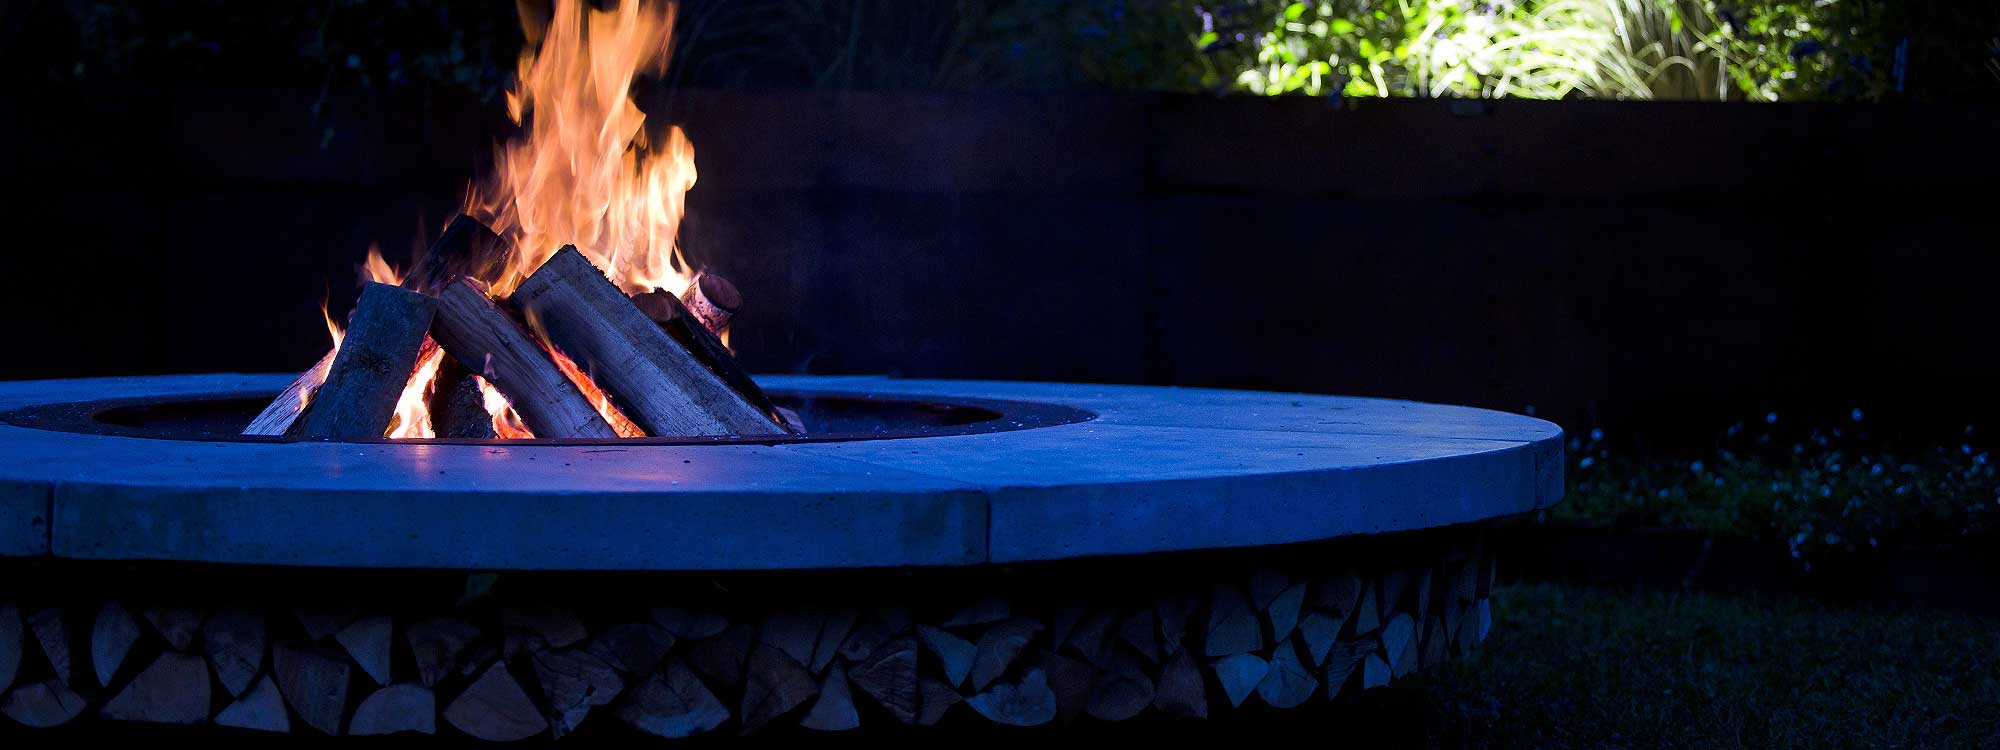 Ercole is a large circular fire pit with exclusive Italian design by AK47